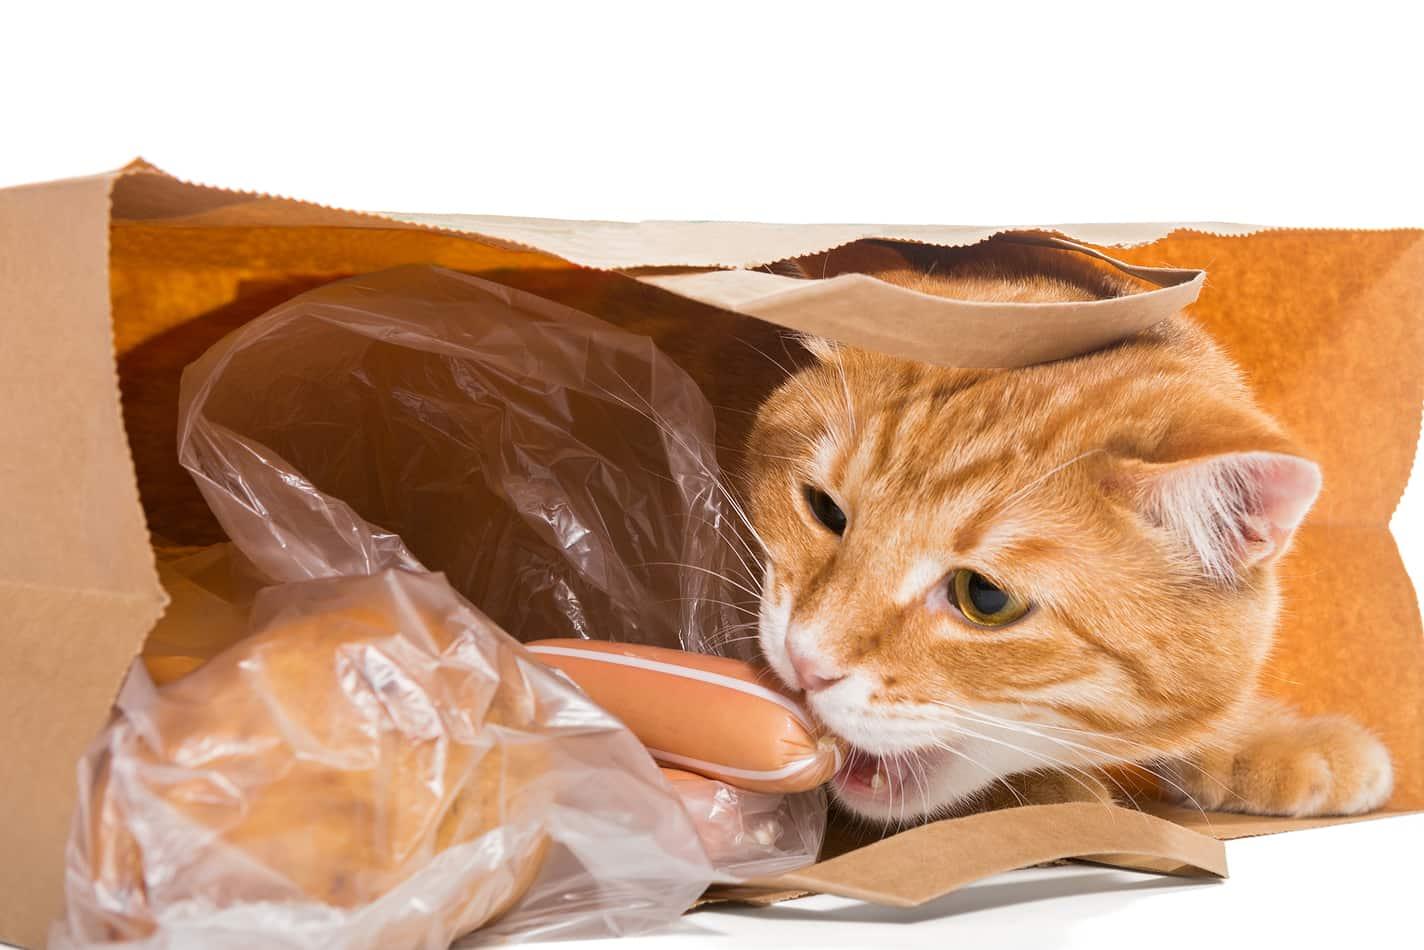 Ginger cat in a paper bag chewing on wrapped sausages.